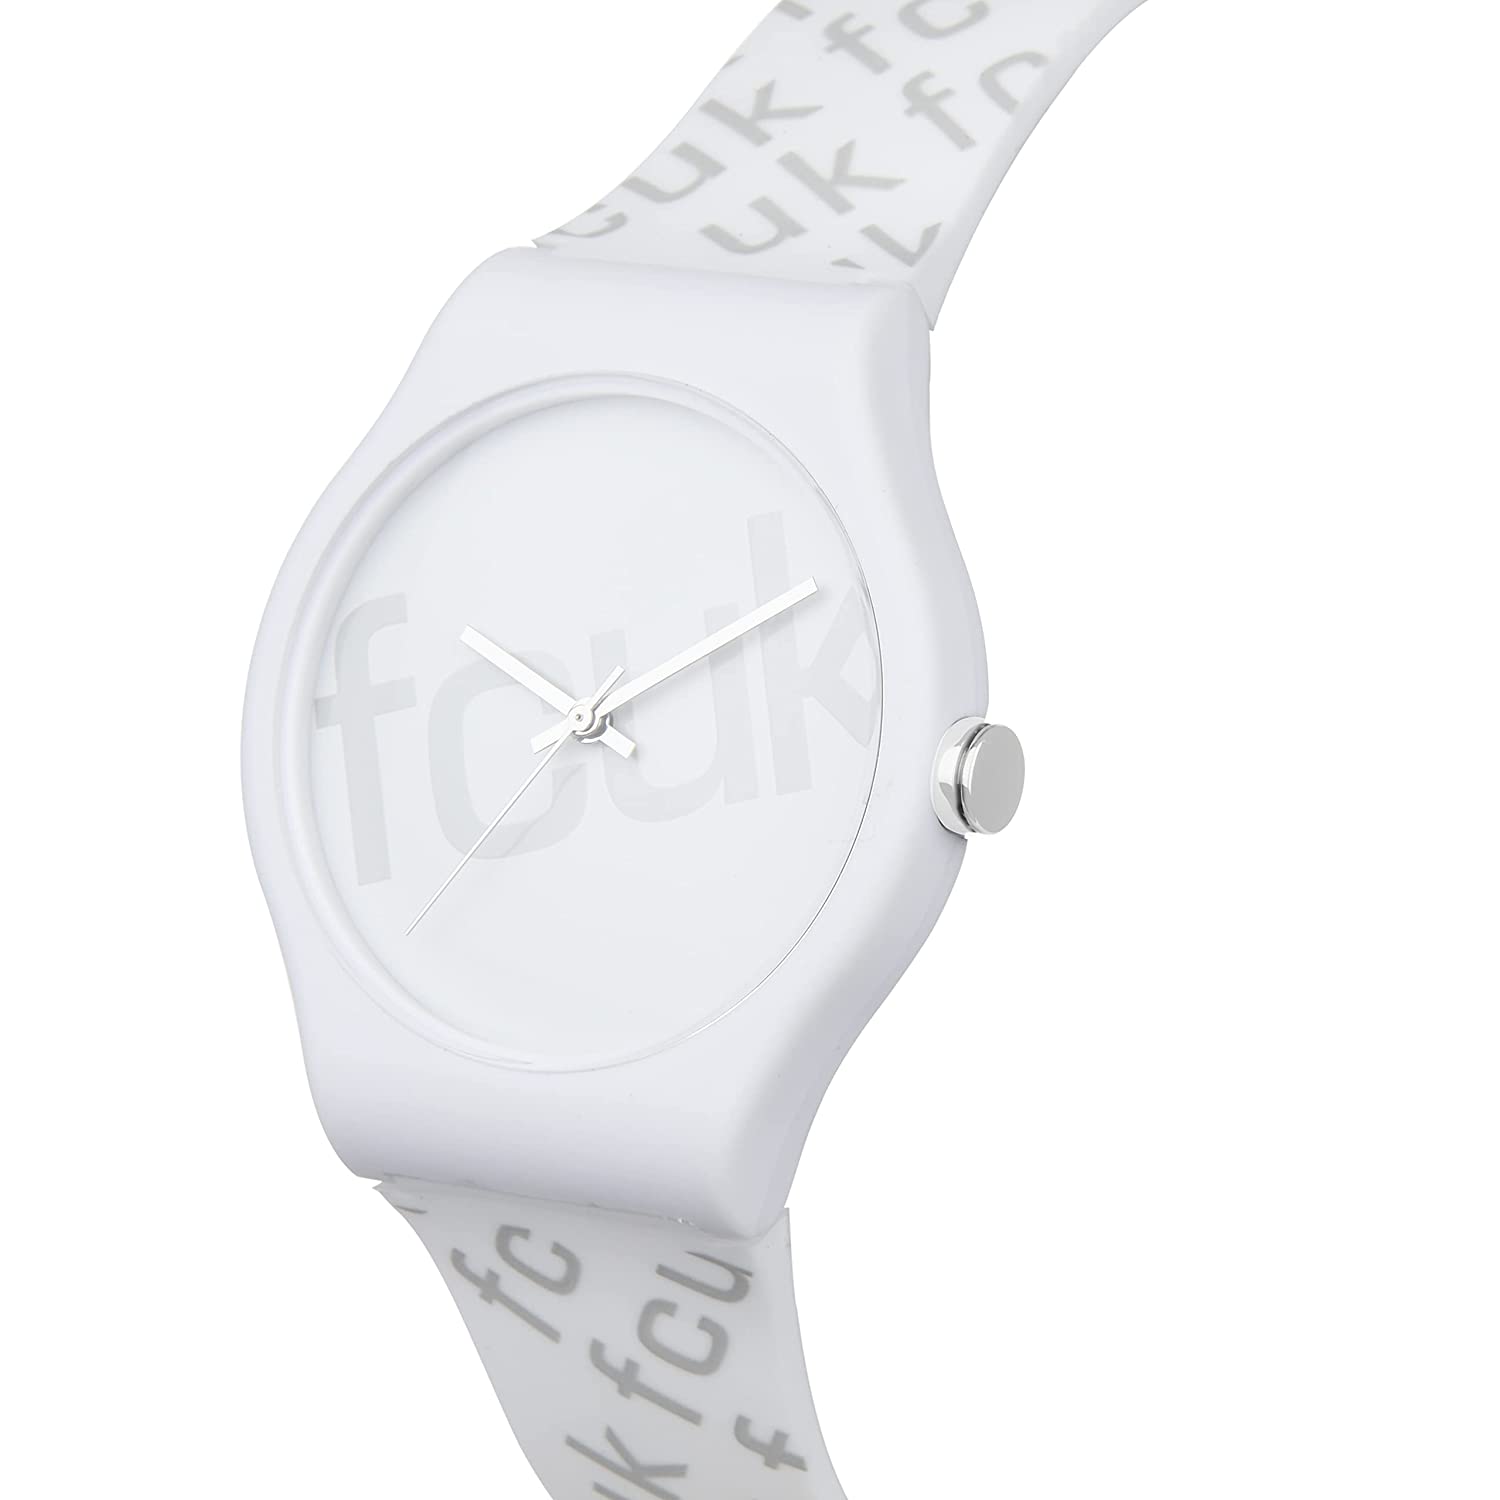 FCUK Analog White Dial Unisex-Adult's Watch-FC171W